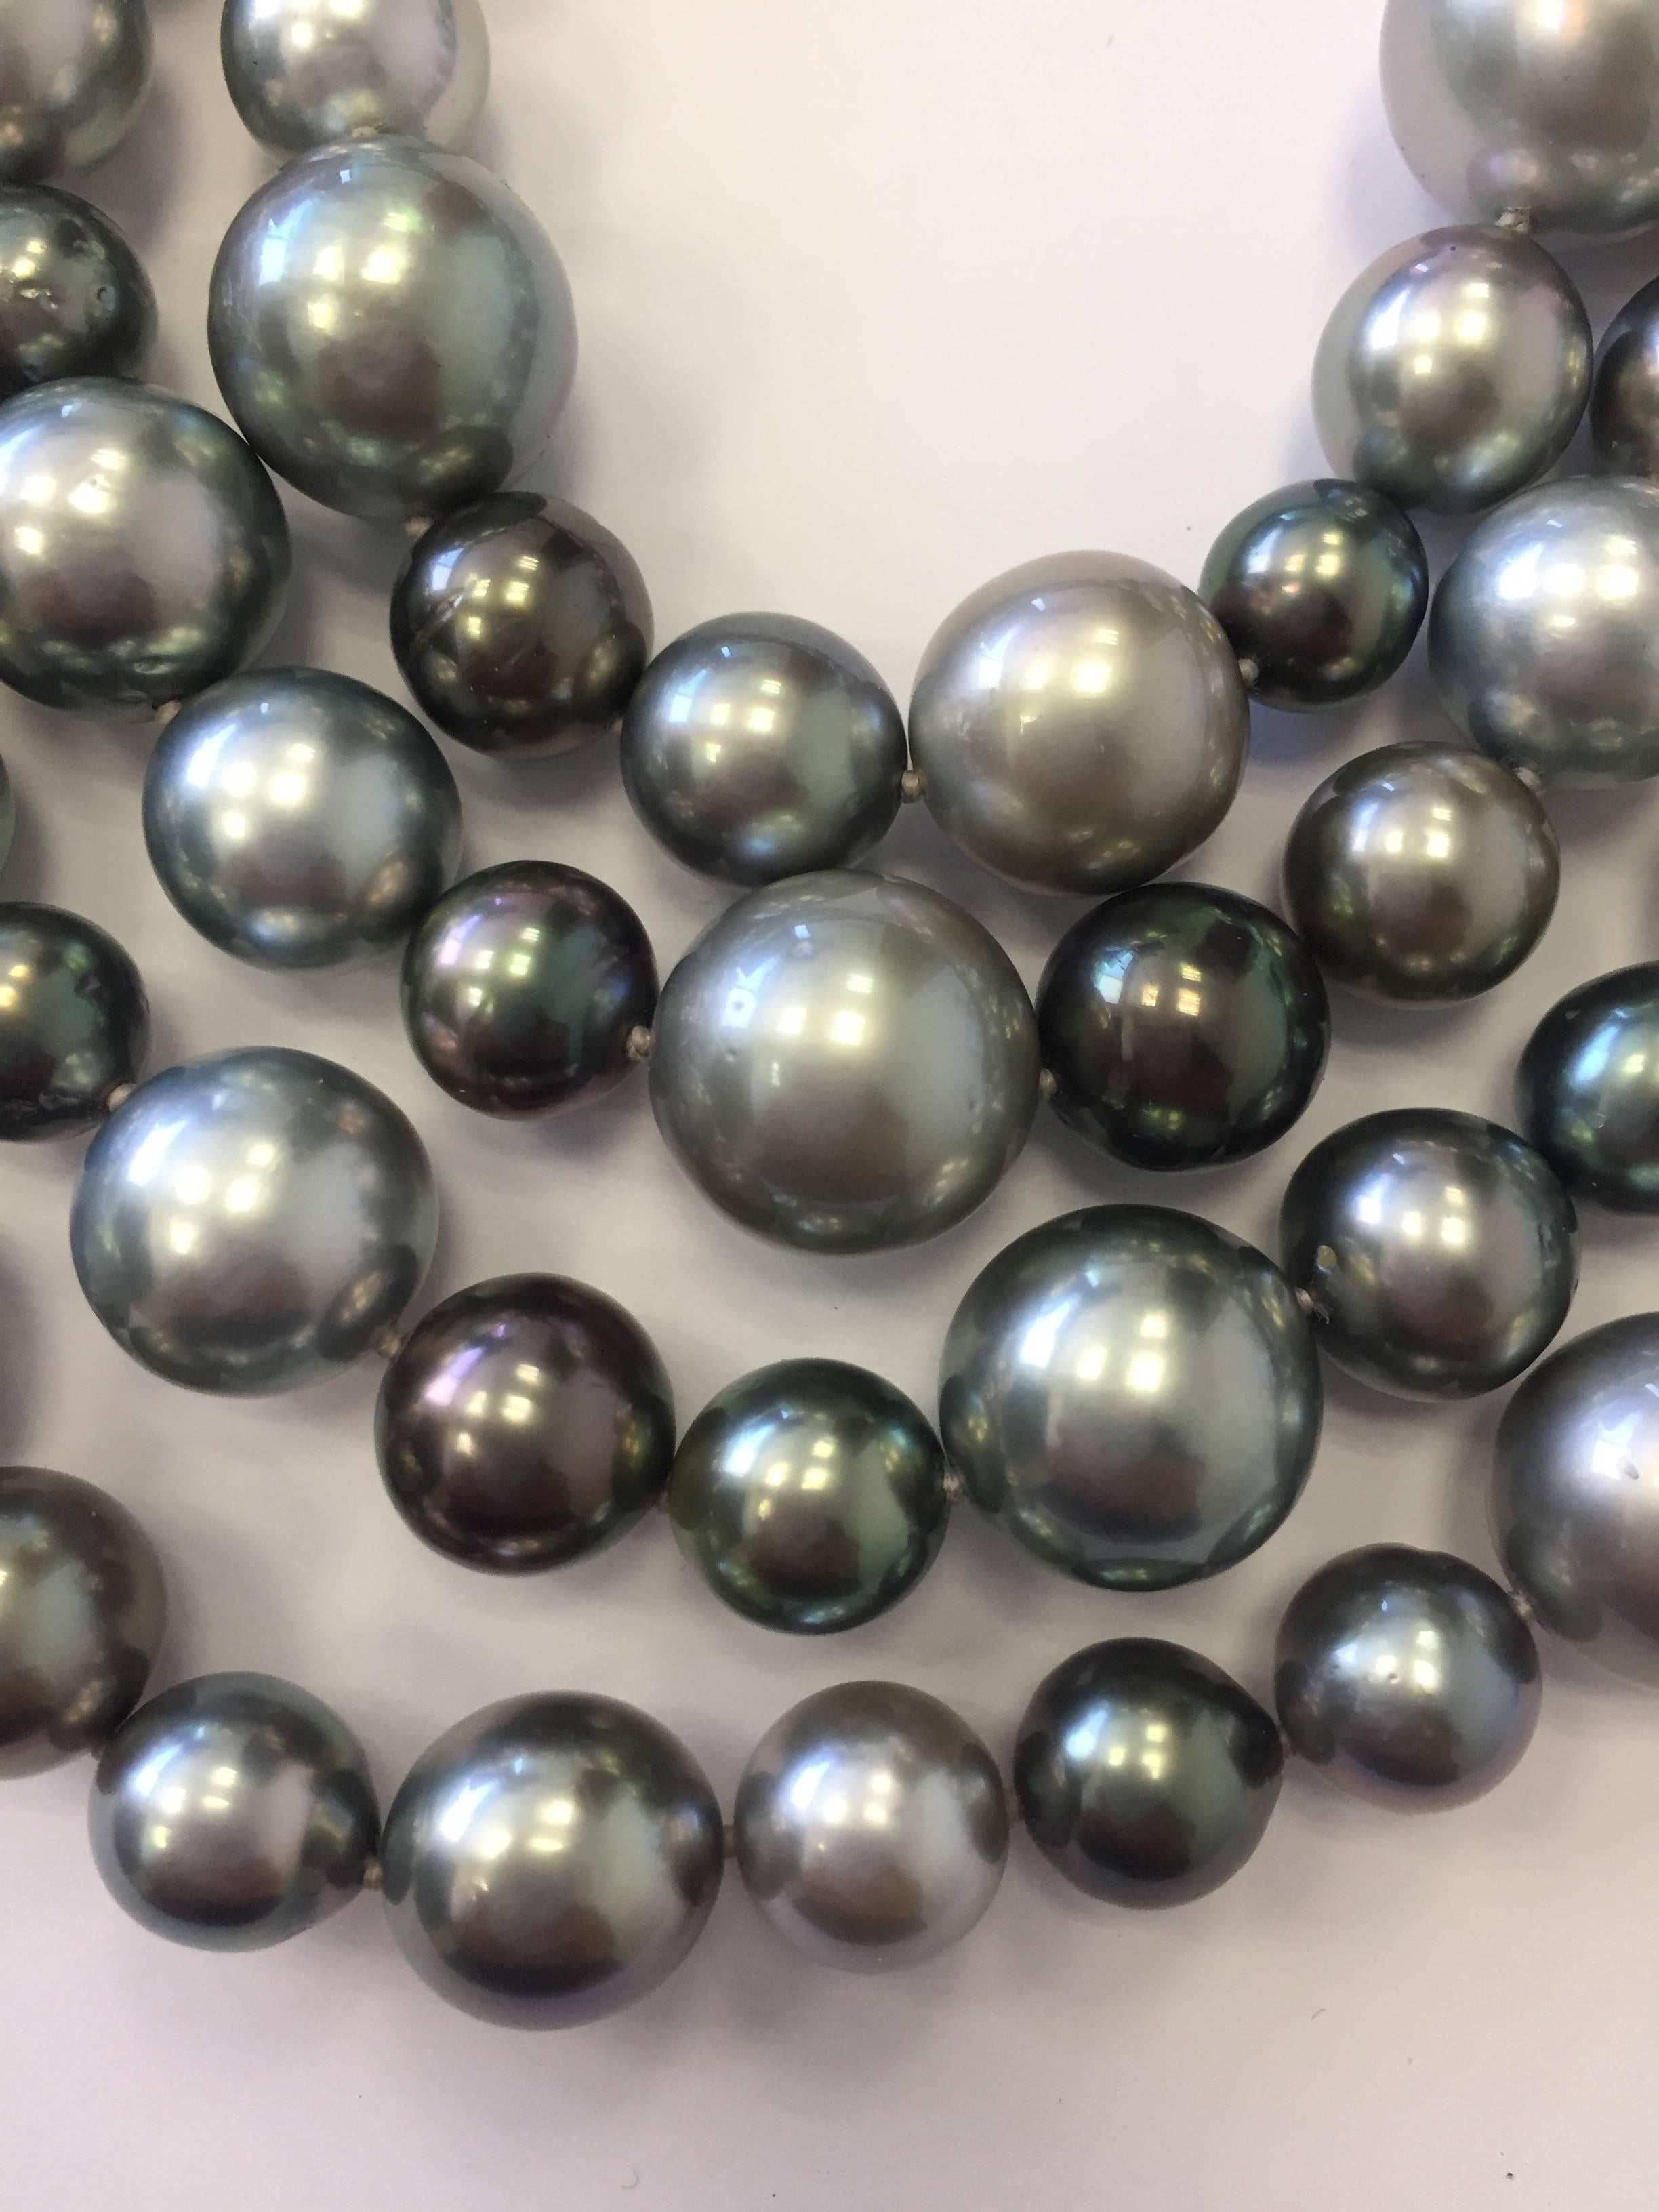 Gorgeous Tahitian pearls with beautiful luster in this 4 tiered necklace in 18k white gold.  Sophisticated and timeless, these pearls will be a great addition to any collection!